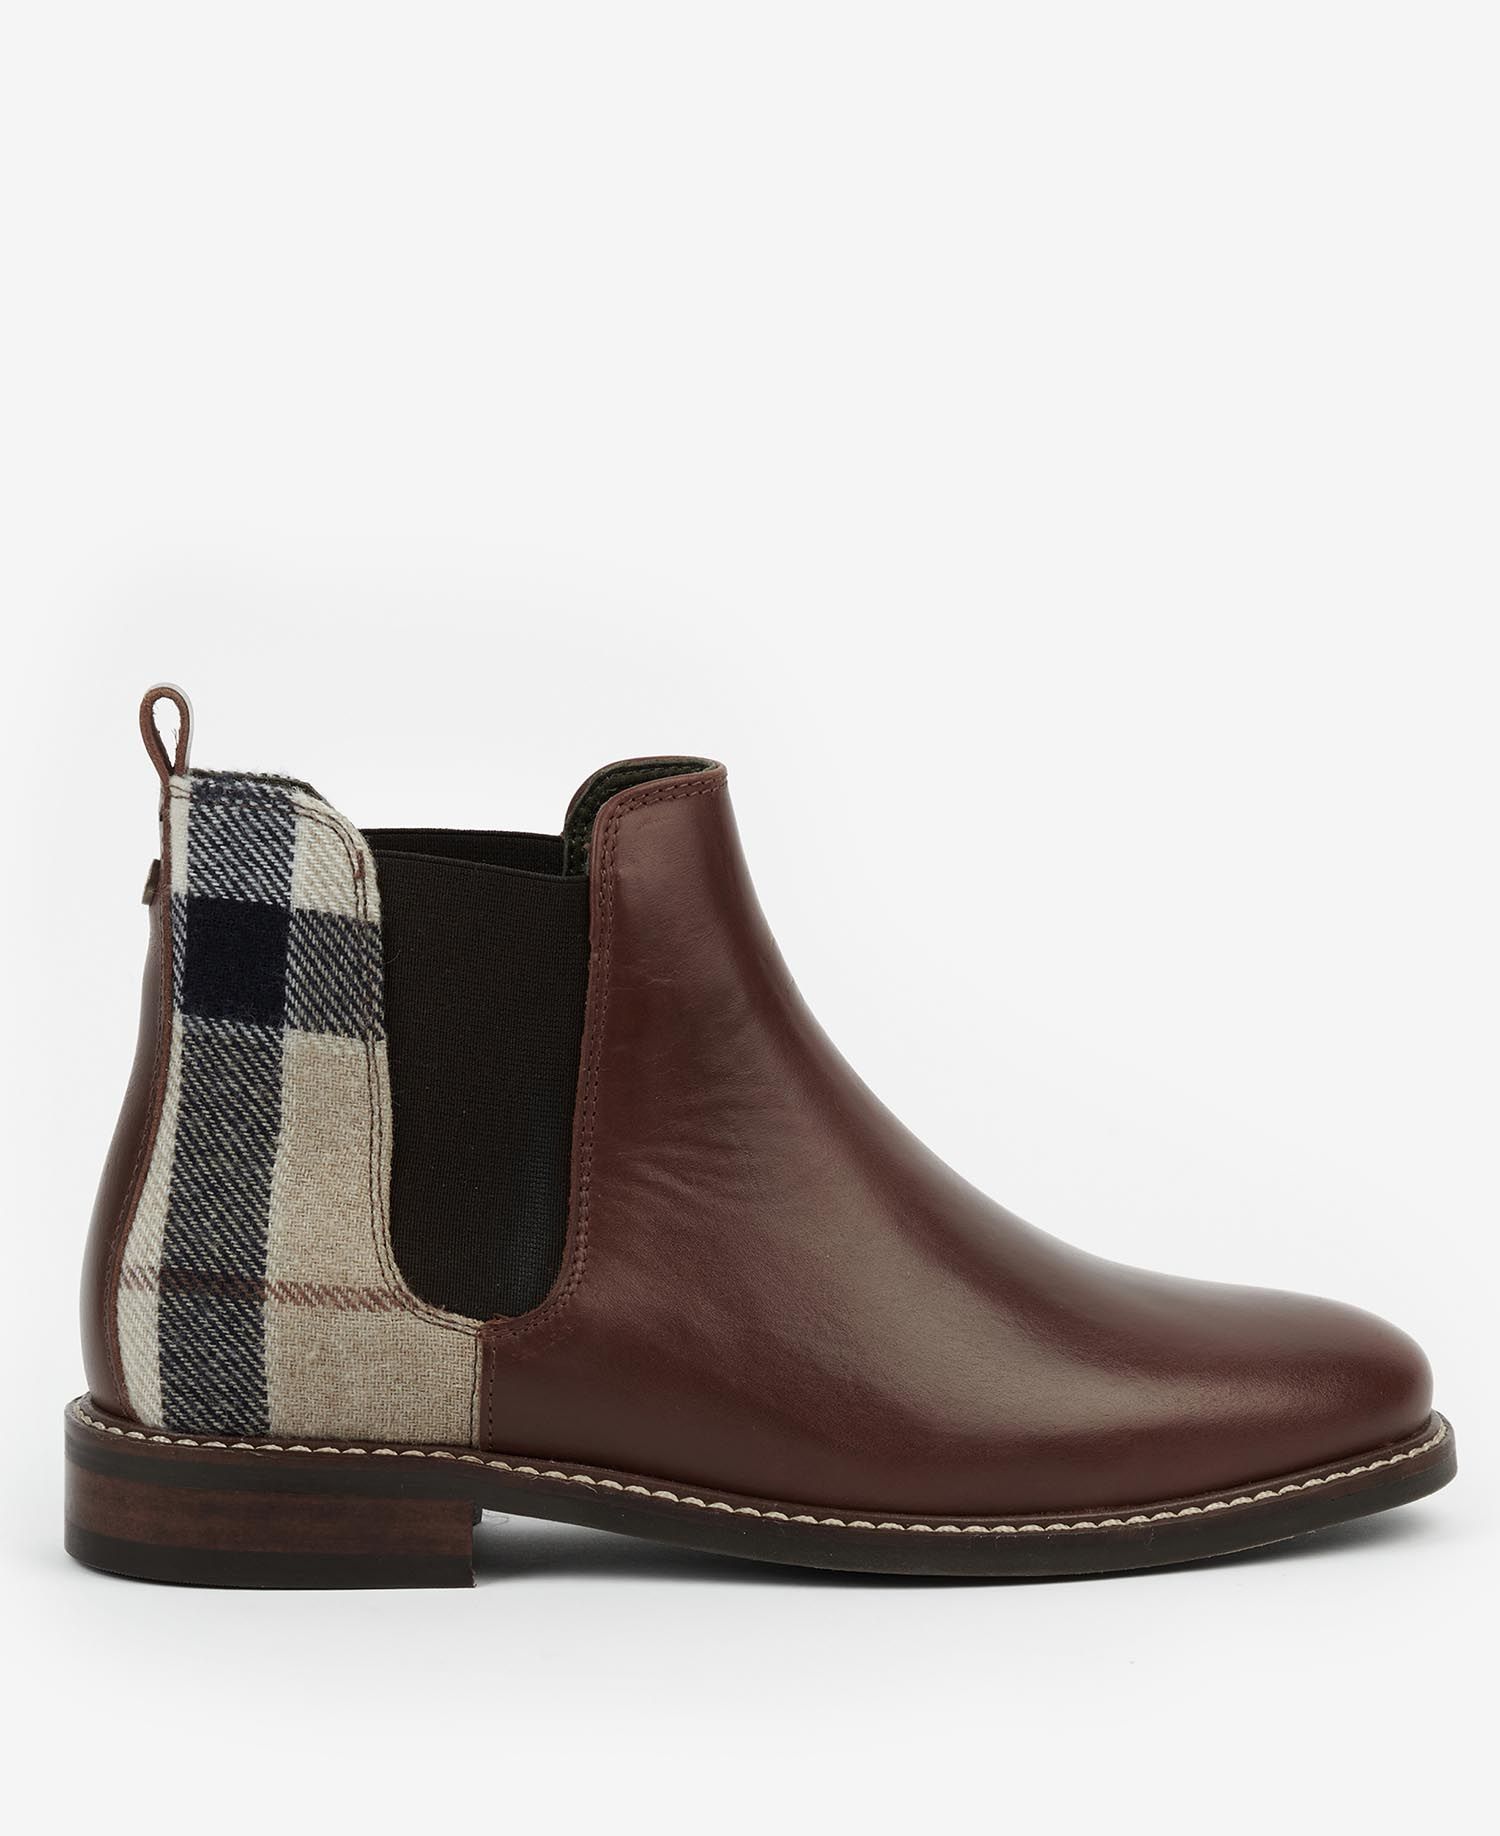 Barbour Sloane Boots